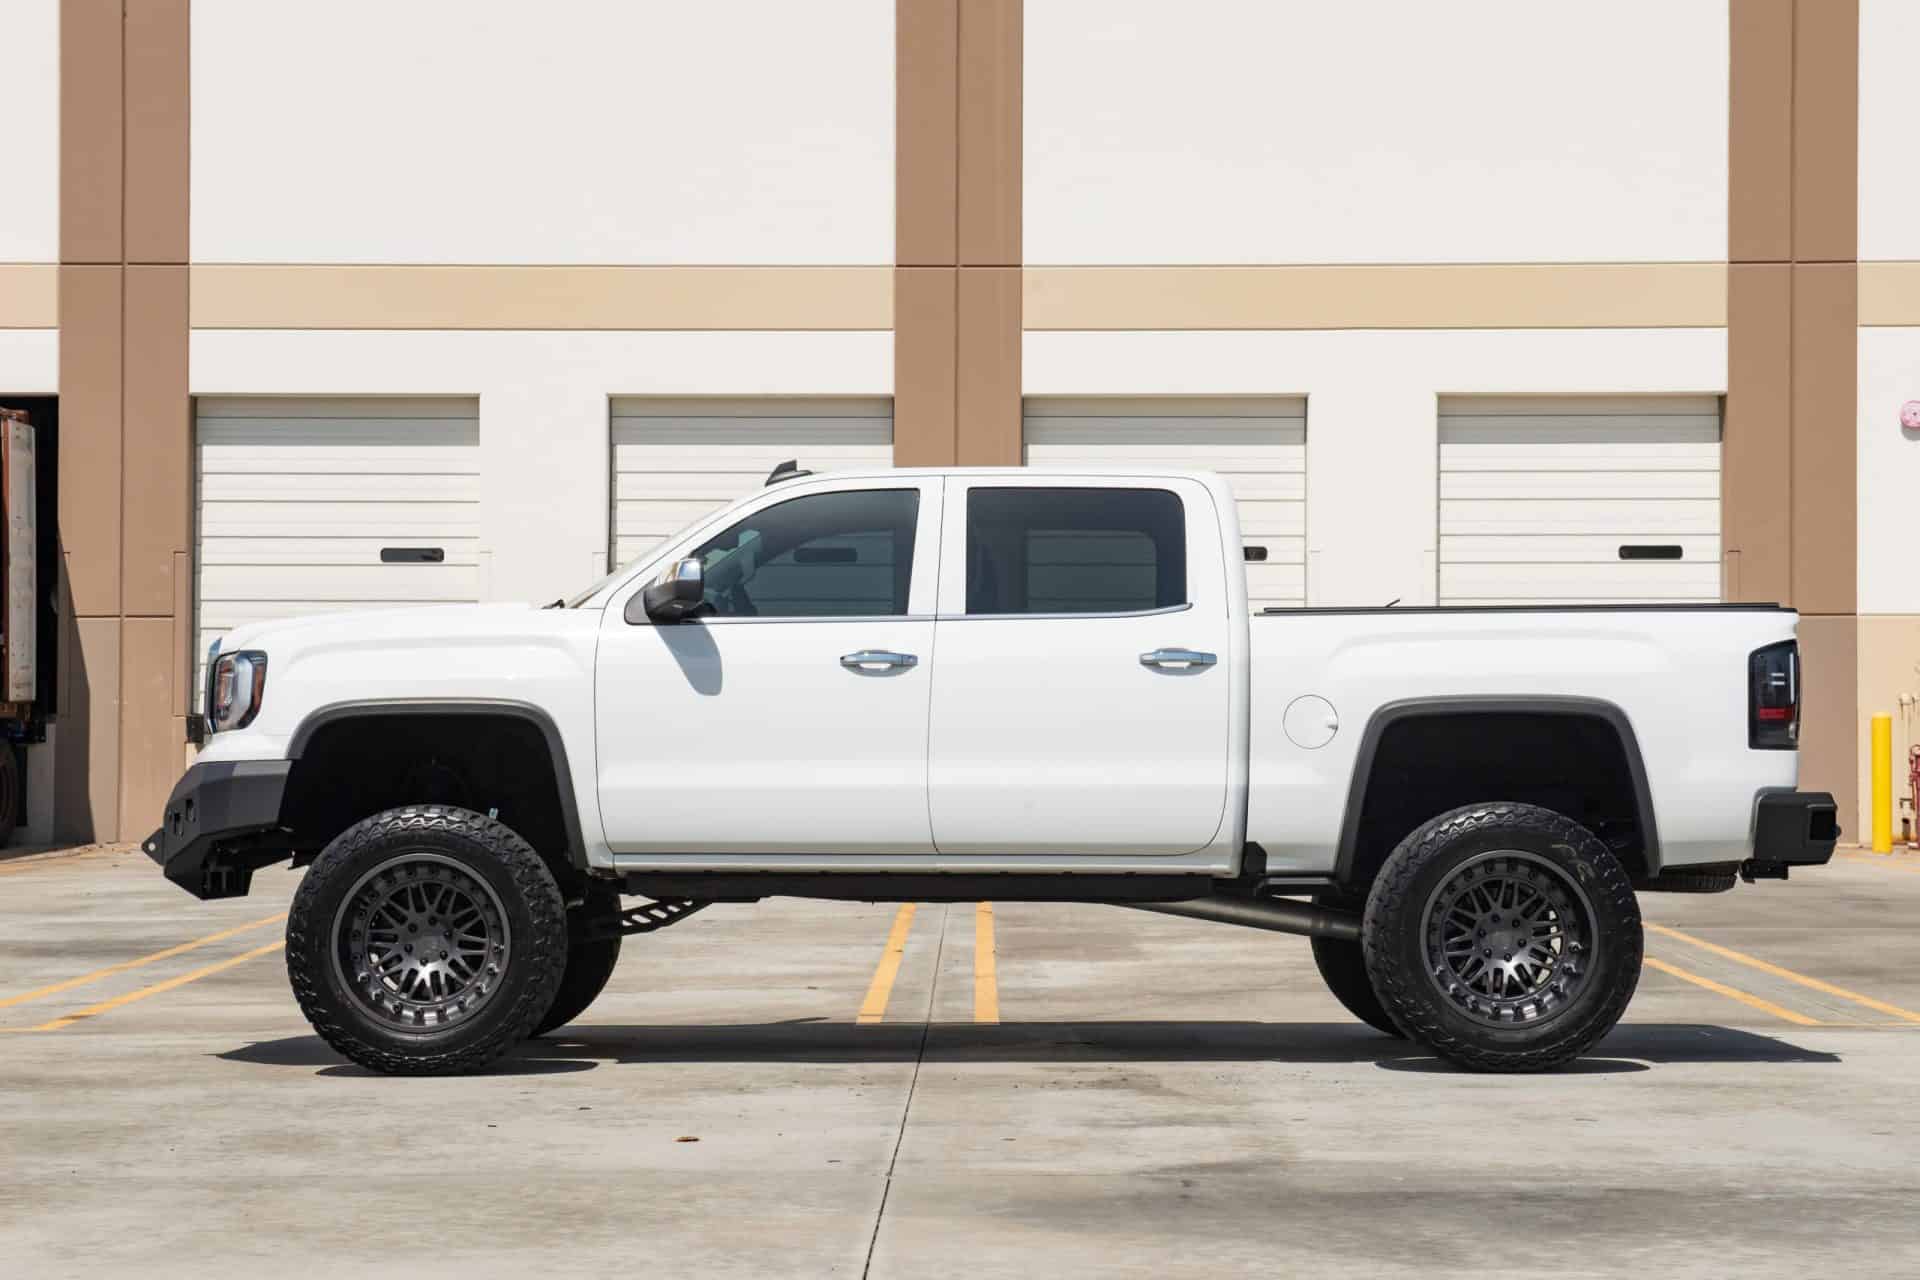 Better driving and a better look with Cheap Used Lifted Trucks for Sale.